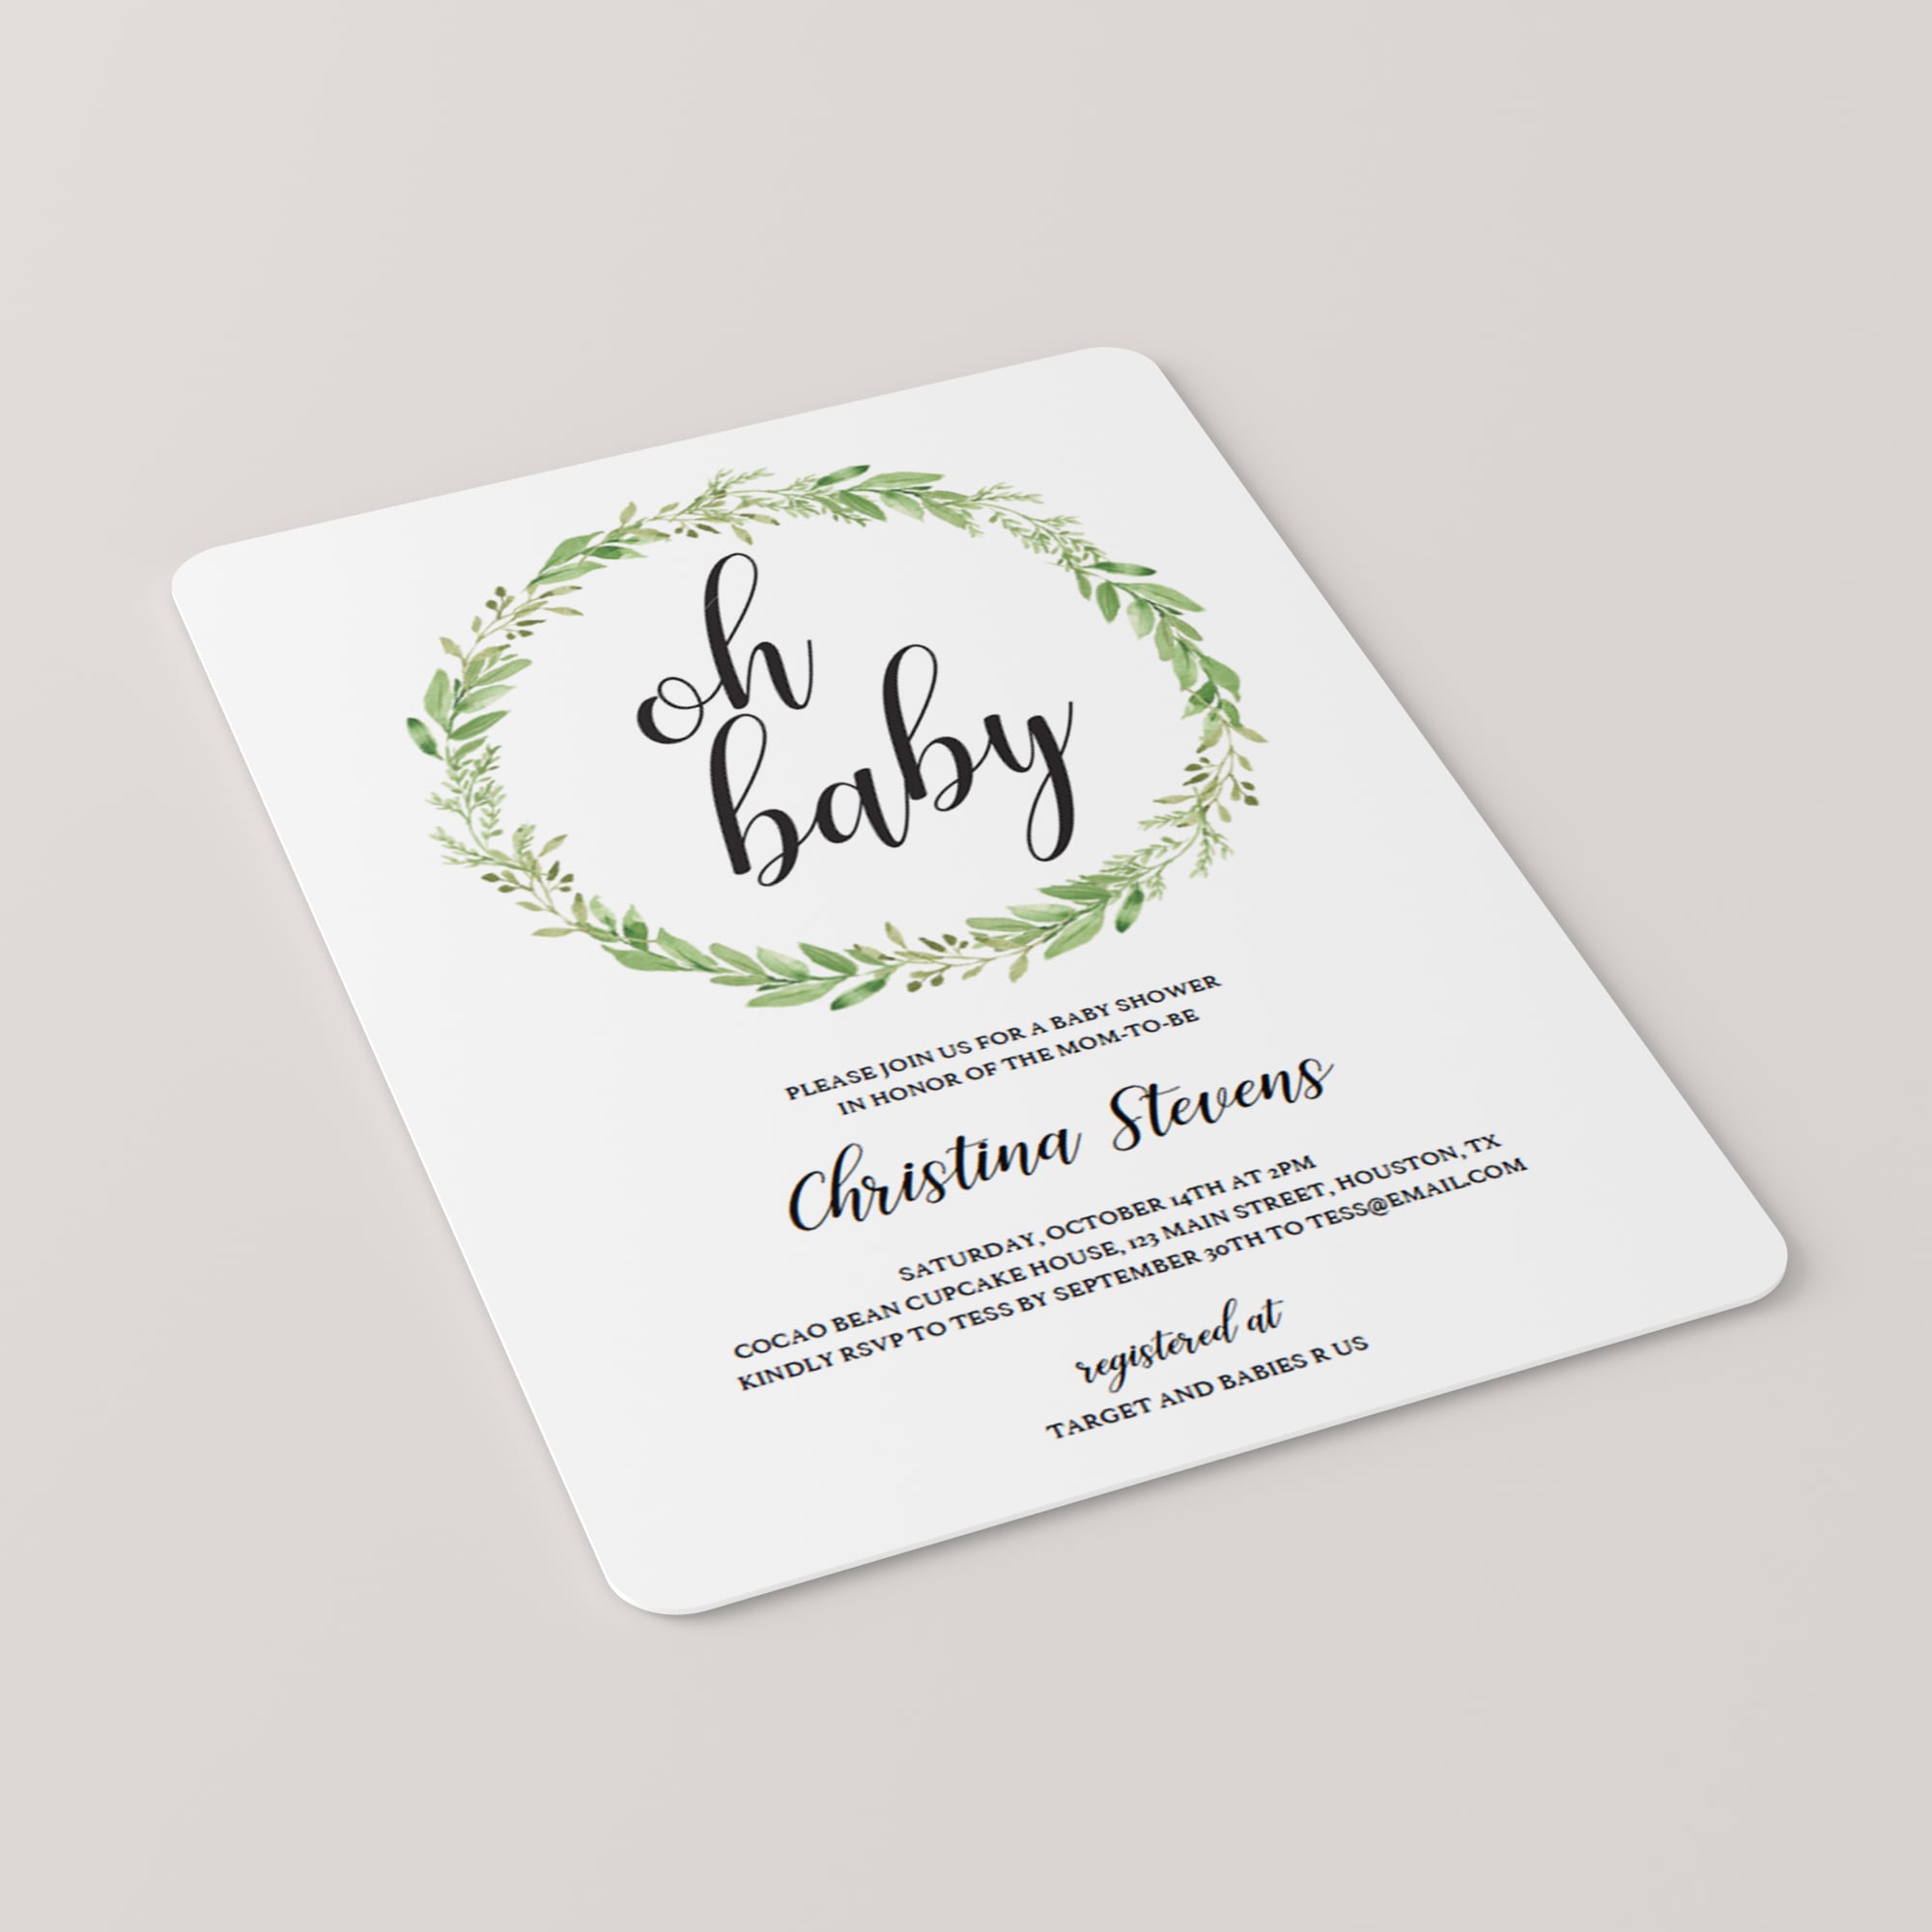 Oh baby baby shower invitation template by LittleSizzle